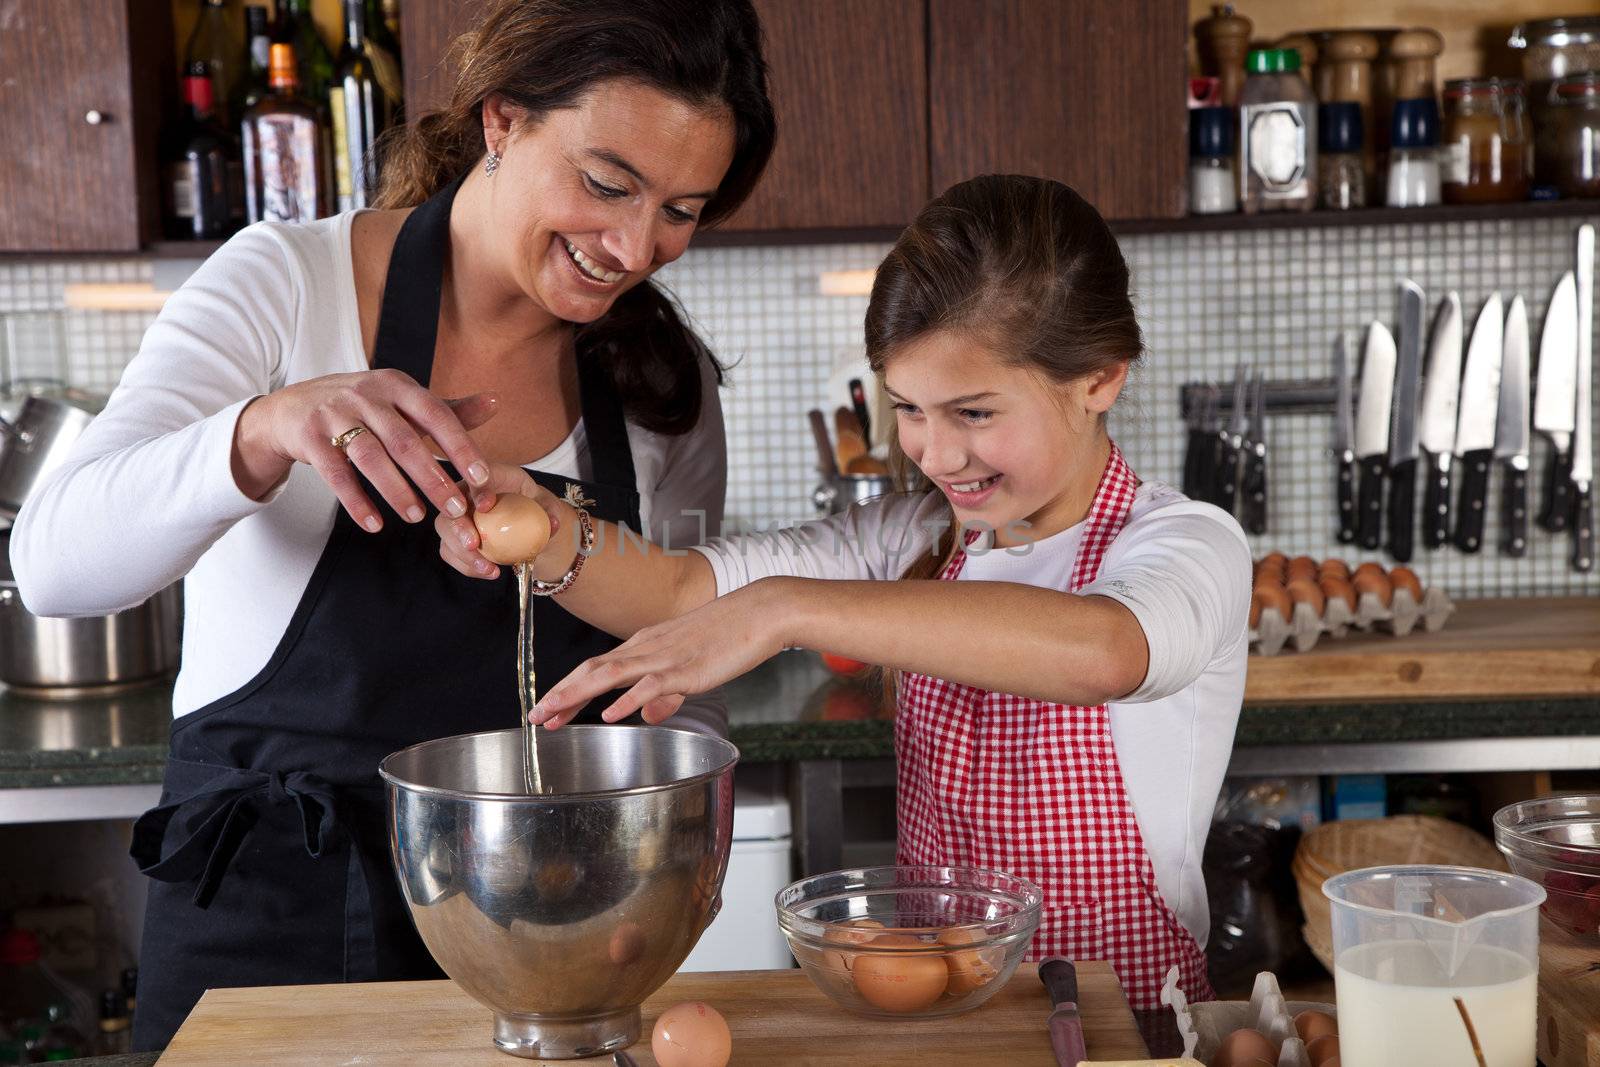 Mother and daughter having fun while baking in the kitchen